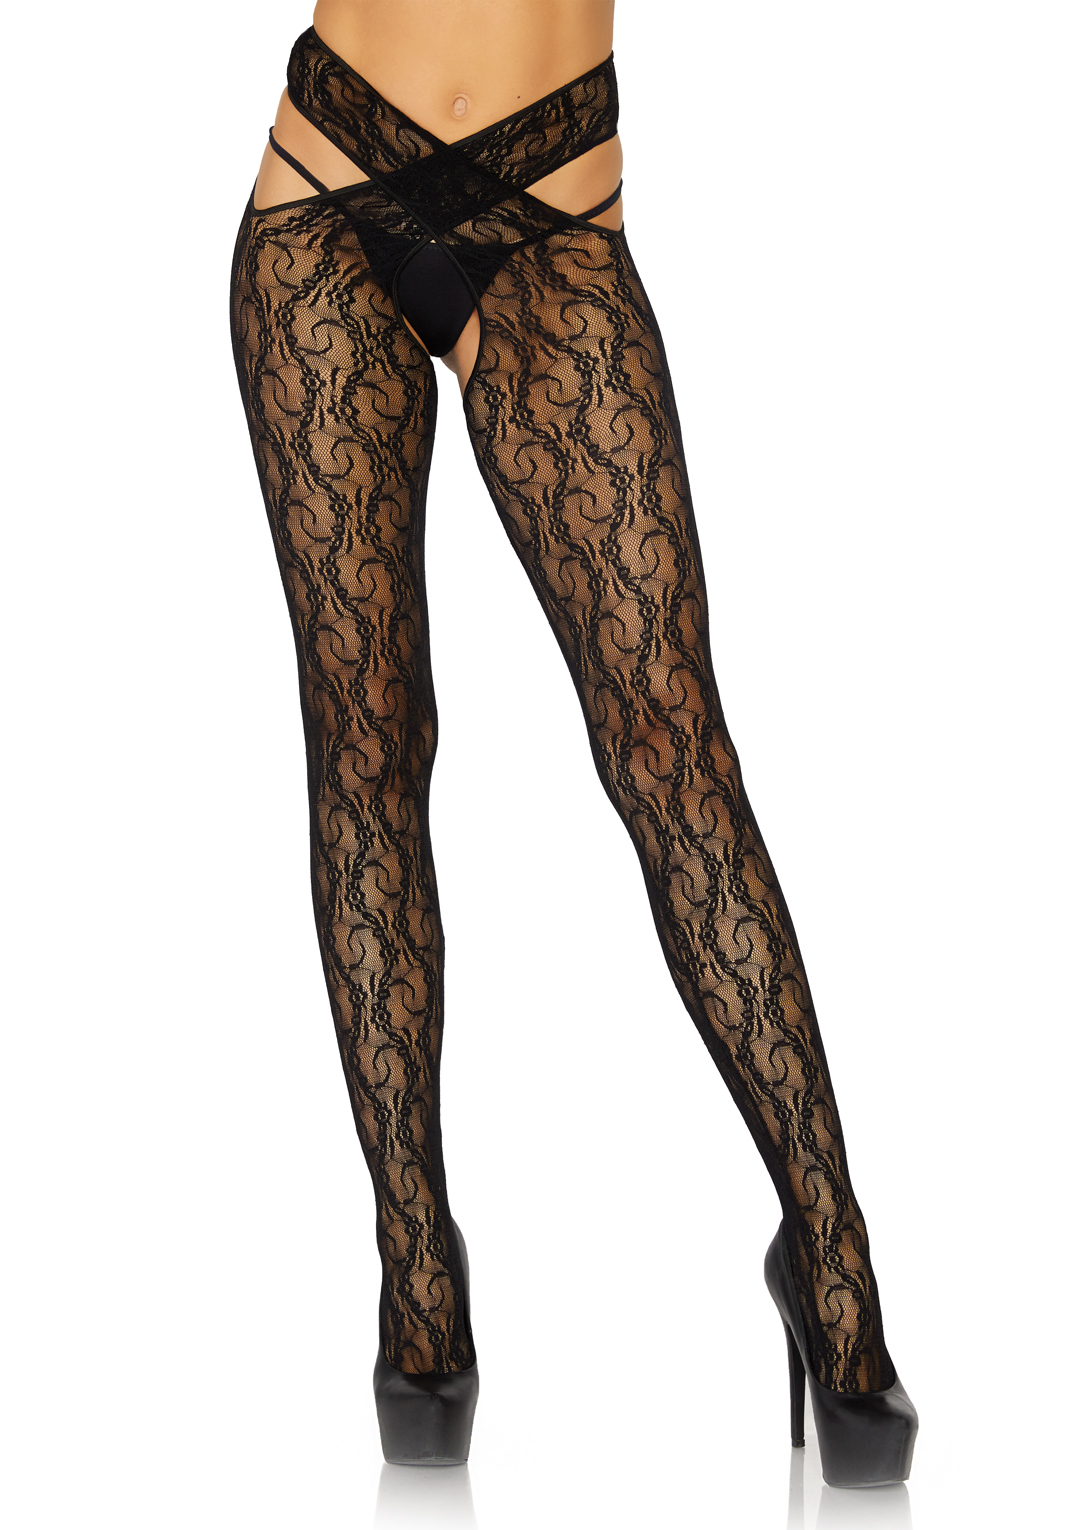 Daisy Chain Floral Lace Crotchless Wrap Around Tights - One Size - Black